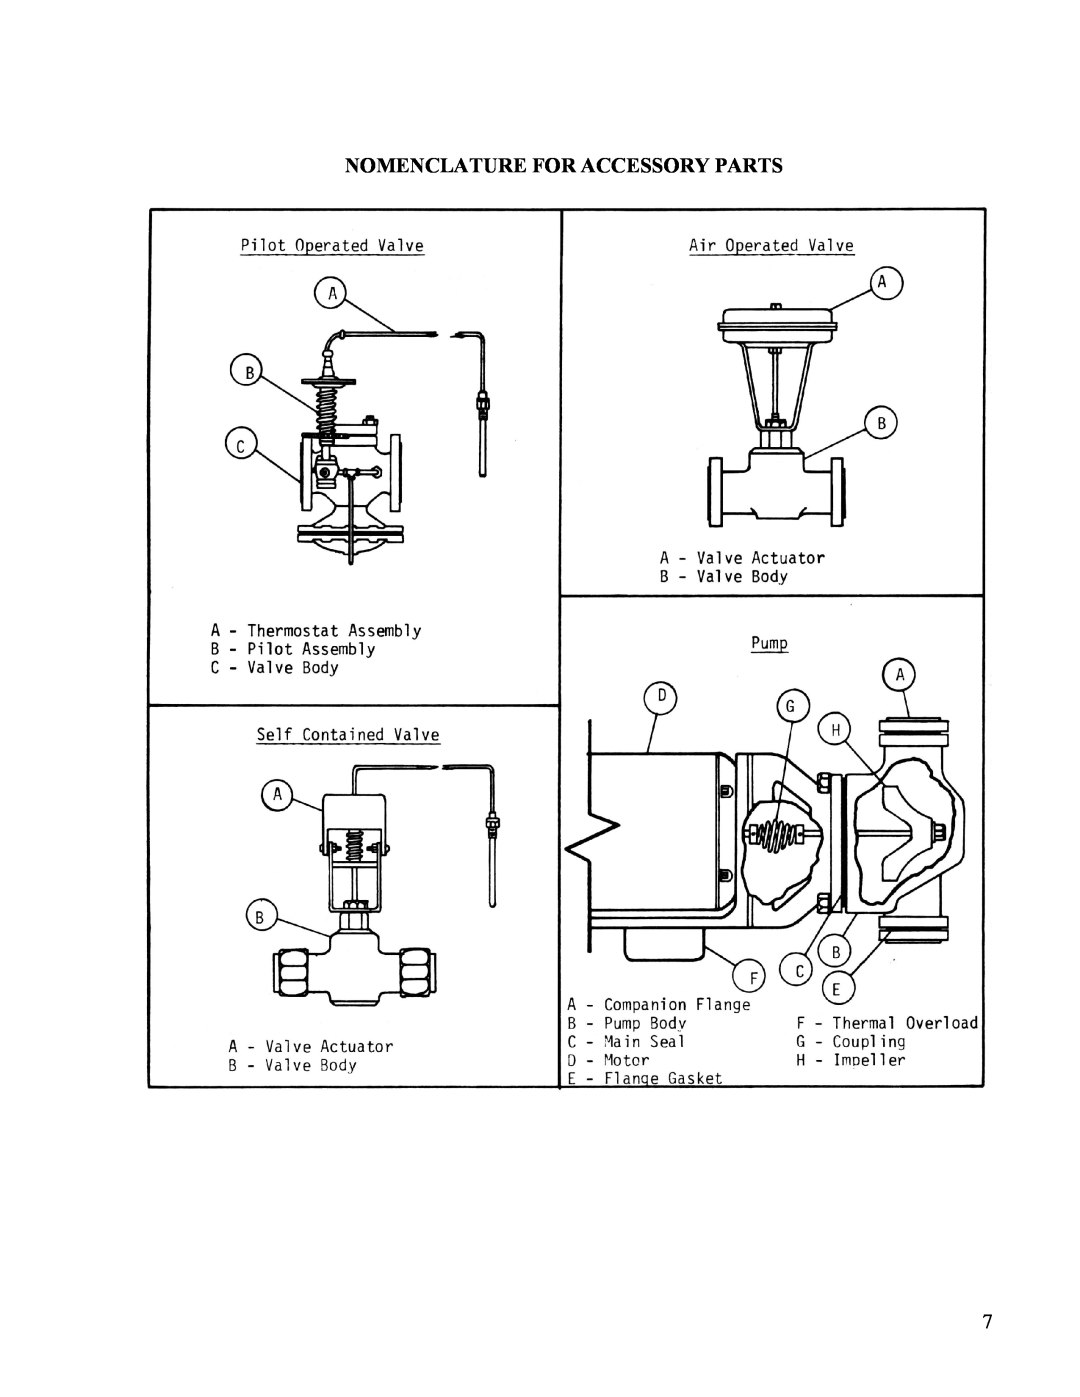 Hubbell STH manual Nomenclature For Accessory Parts 